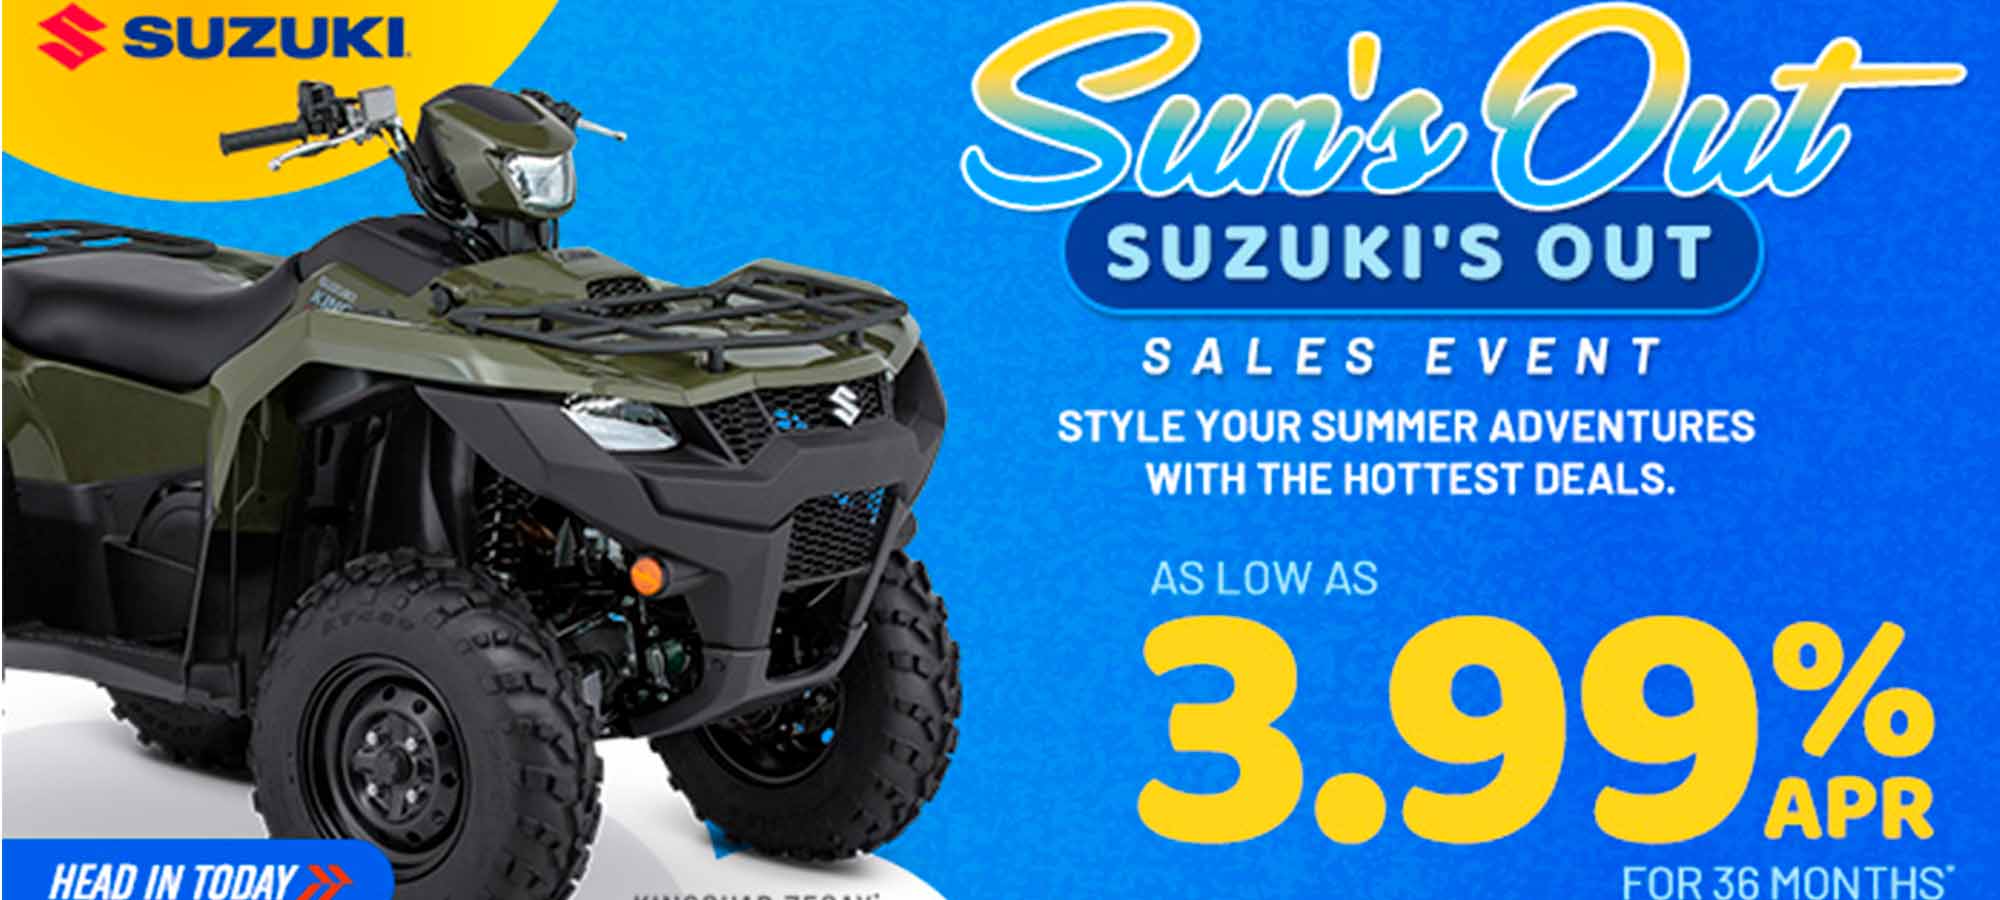 Suzuki US - Sun's Out Suzuki's Out Sales Event at Arkport Cycles